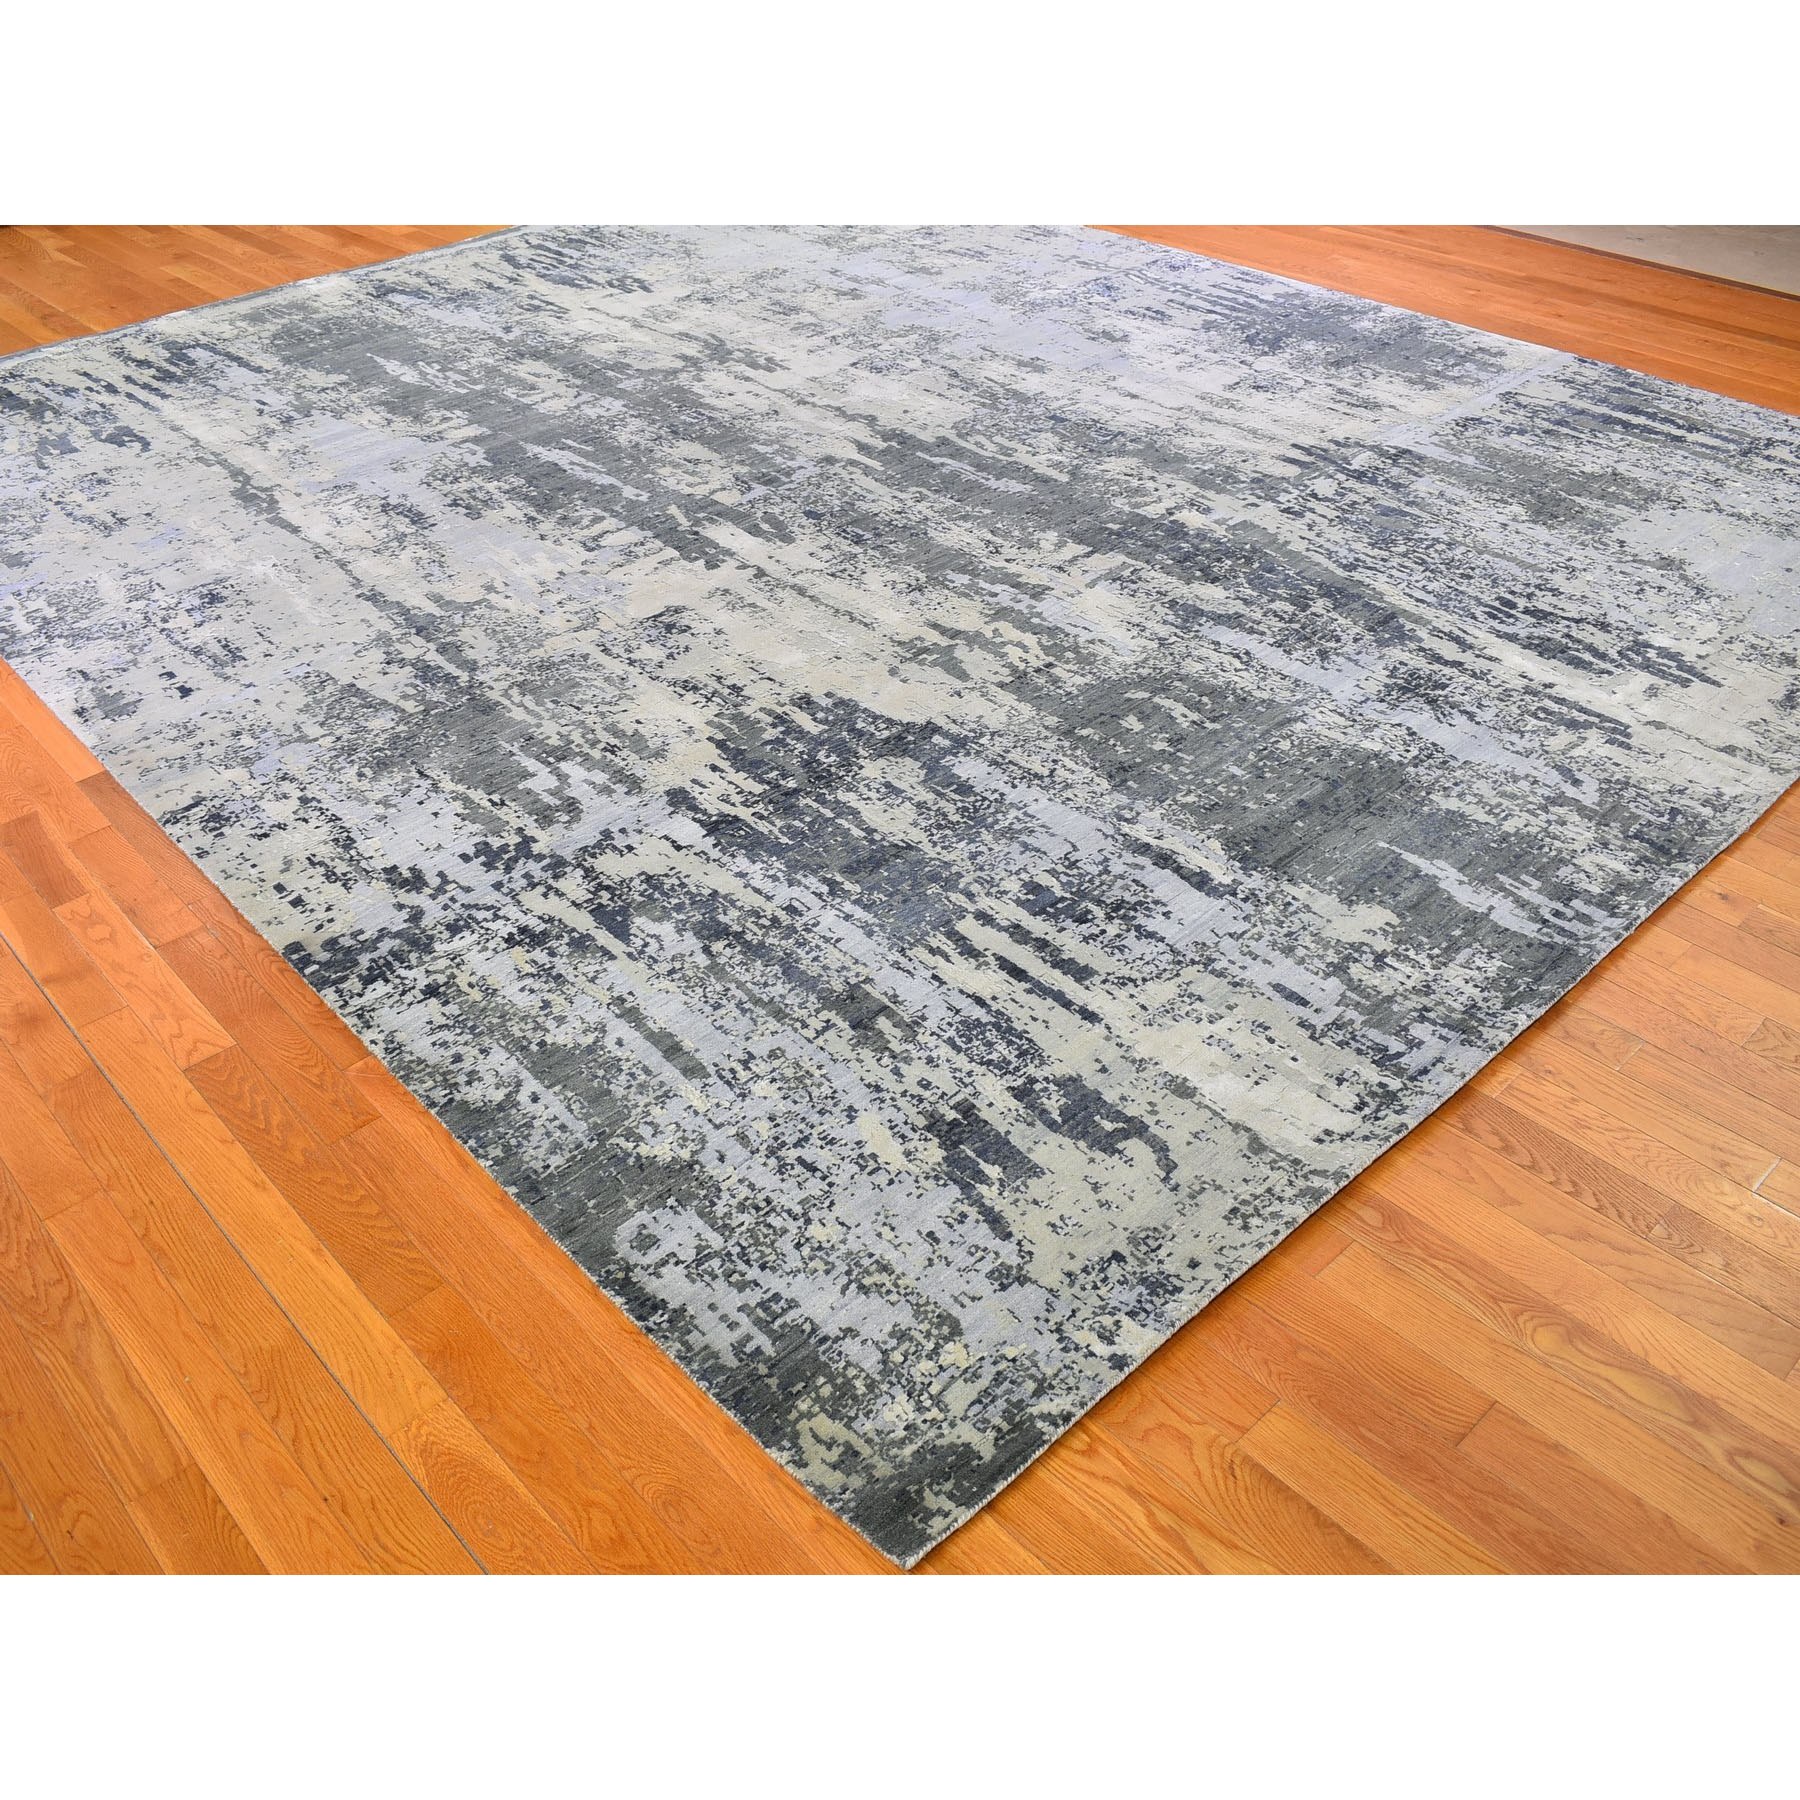 12'1"x15'2" Oversized Abstract Design Wool and Silk Denser Weave Charcoal Gray Persian Knot Hand Woven Oriental Rug 